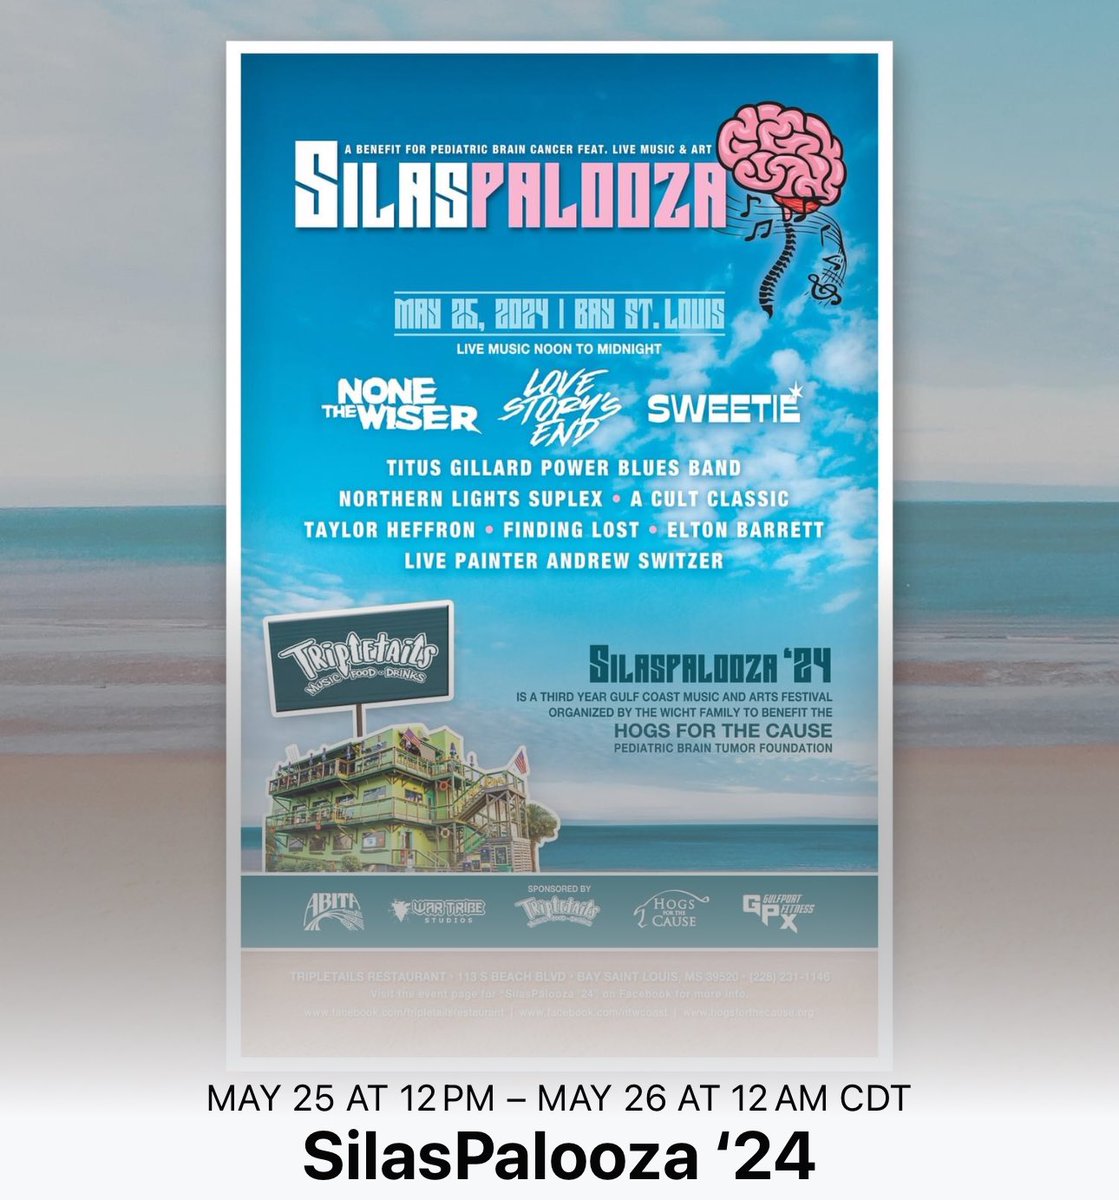 Silaspalooza is going down this Saturday, May 25th, at Tripletails Restaurant in Bay St. Louis, MS from noon to midnight! Performances, food, family and fun benefiting the Hogs For a Cause Pediatric Brain Cancer Foundation. facebook.com/events/s/silas…